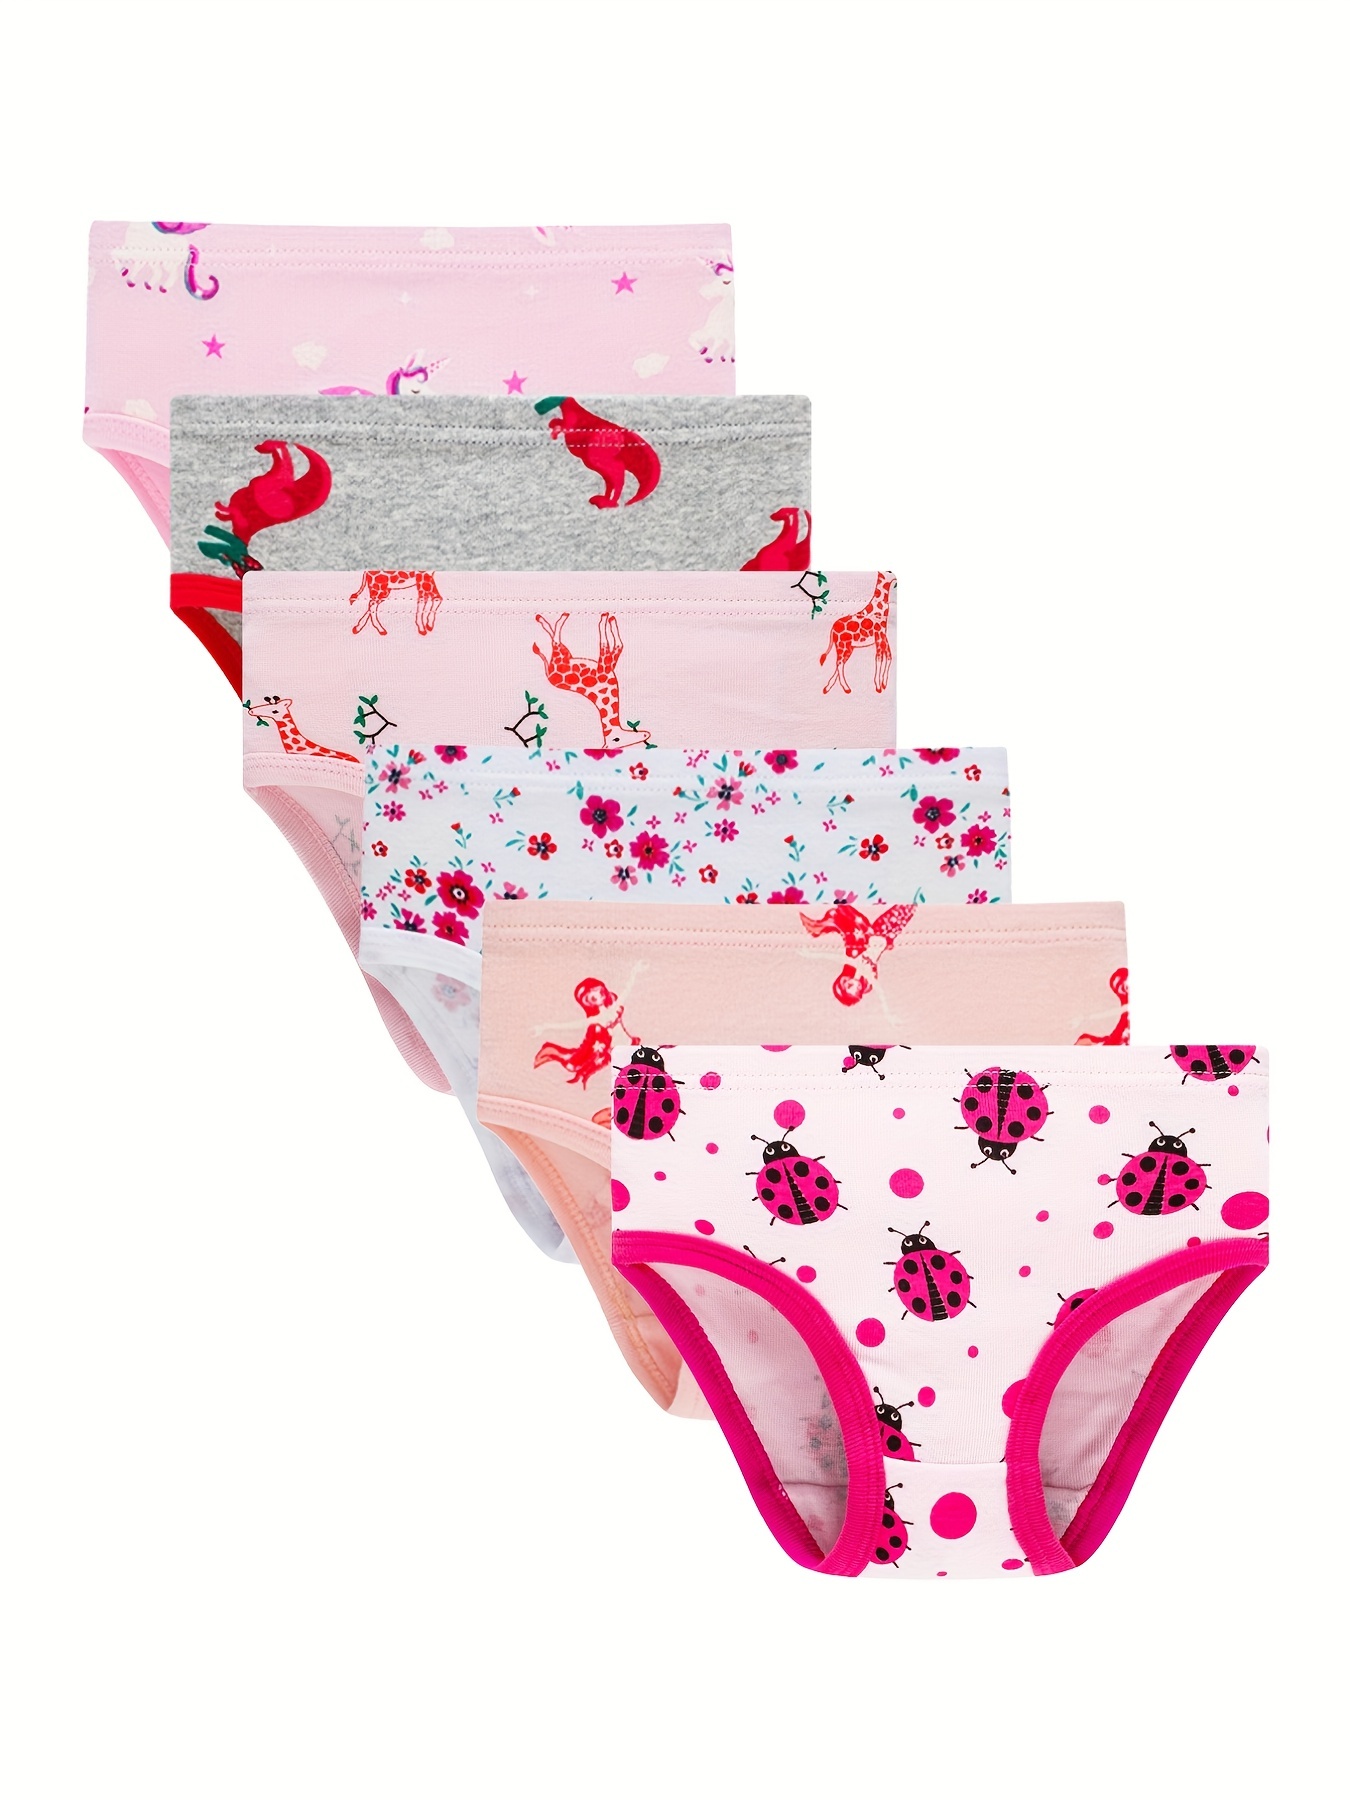 Funny Women's Christmas Underwear Knickers Christmas Gift, Cotton